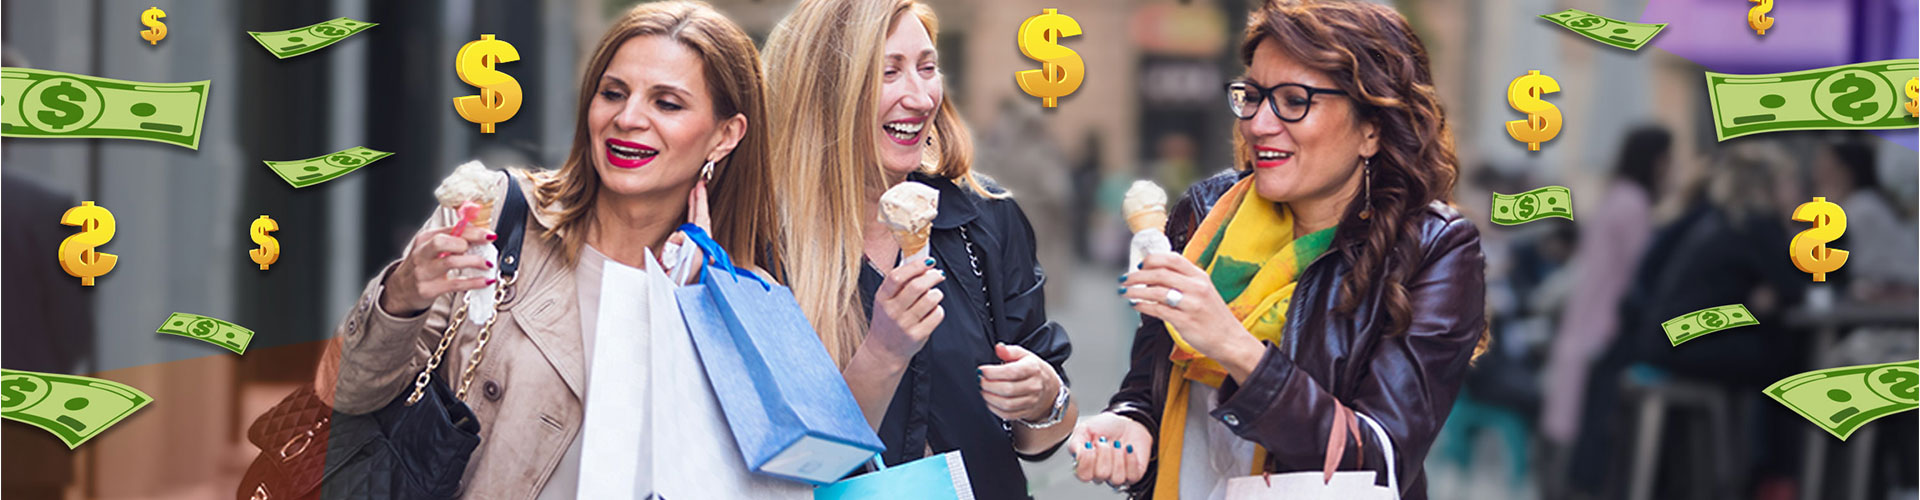 Blog banner featuring three middle aged women walking with shopping bags and ice cream cones